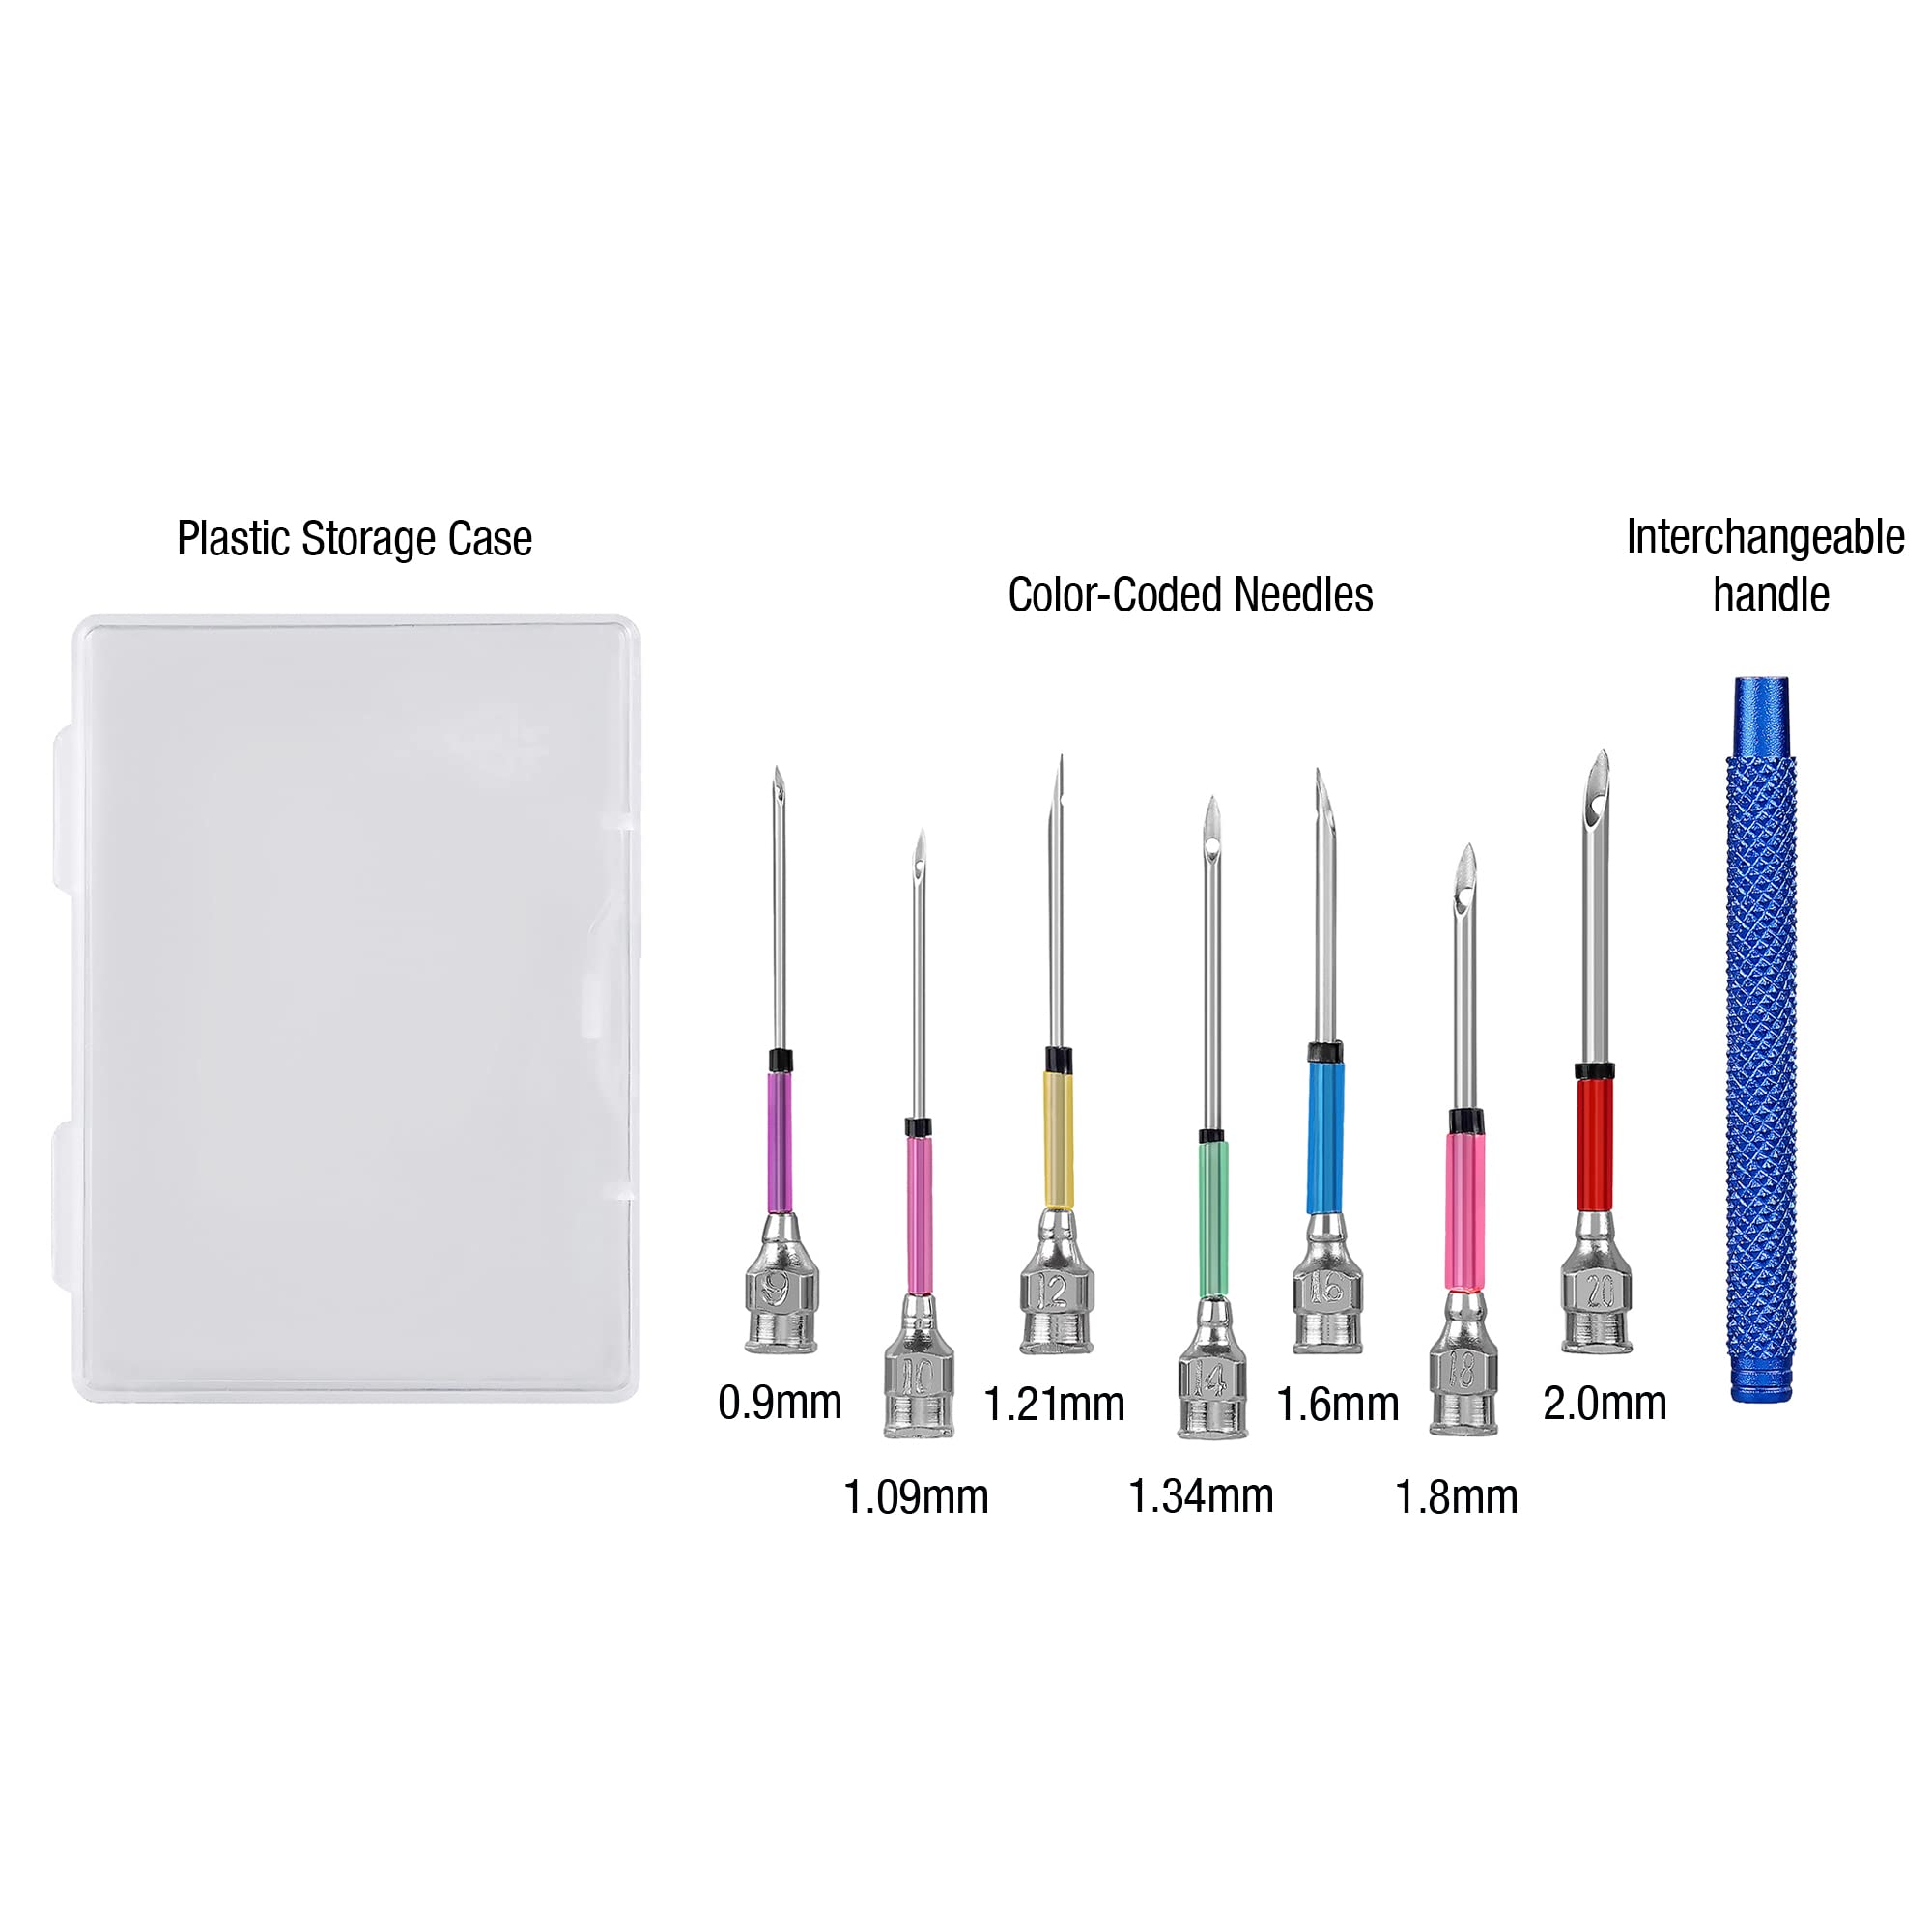 SINGER 8 Piece Punch Needle Embroidery Kit with 7 Assorted Size Punch Needle Heads, Interchangeable Handle, and Punch Needle Storage Case